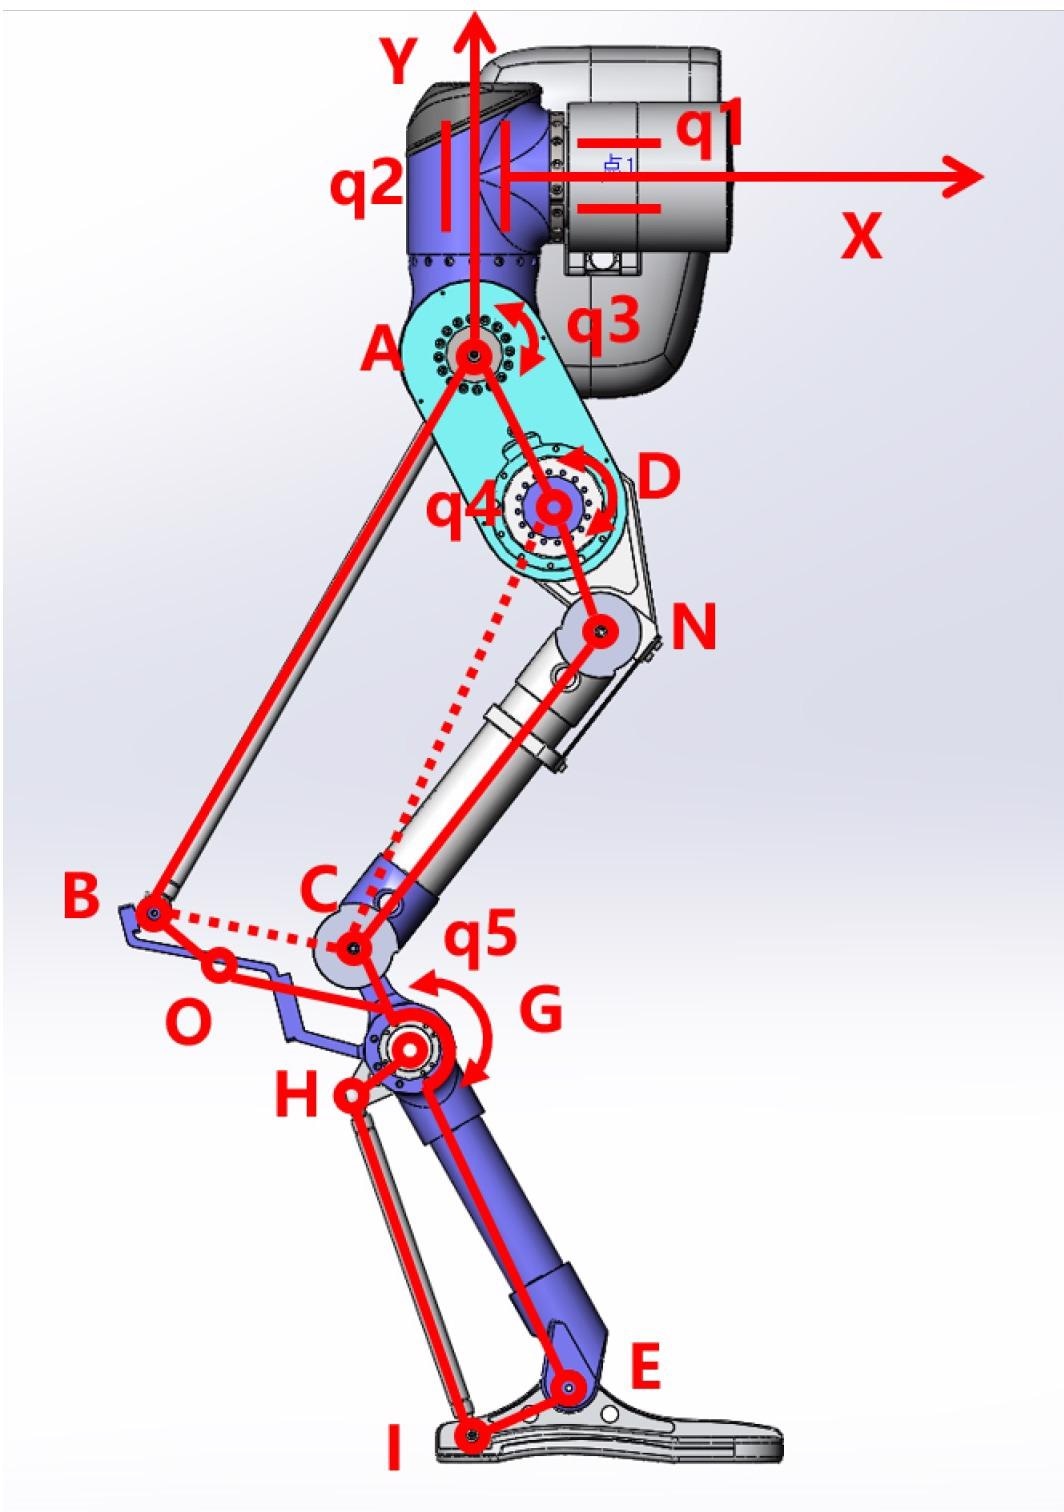 Side view and mechanism diagram of biped robot simulation model.